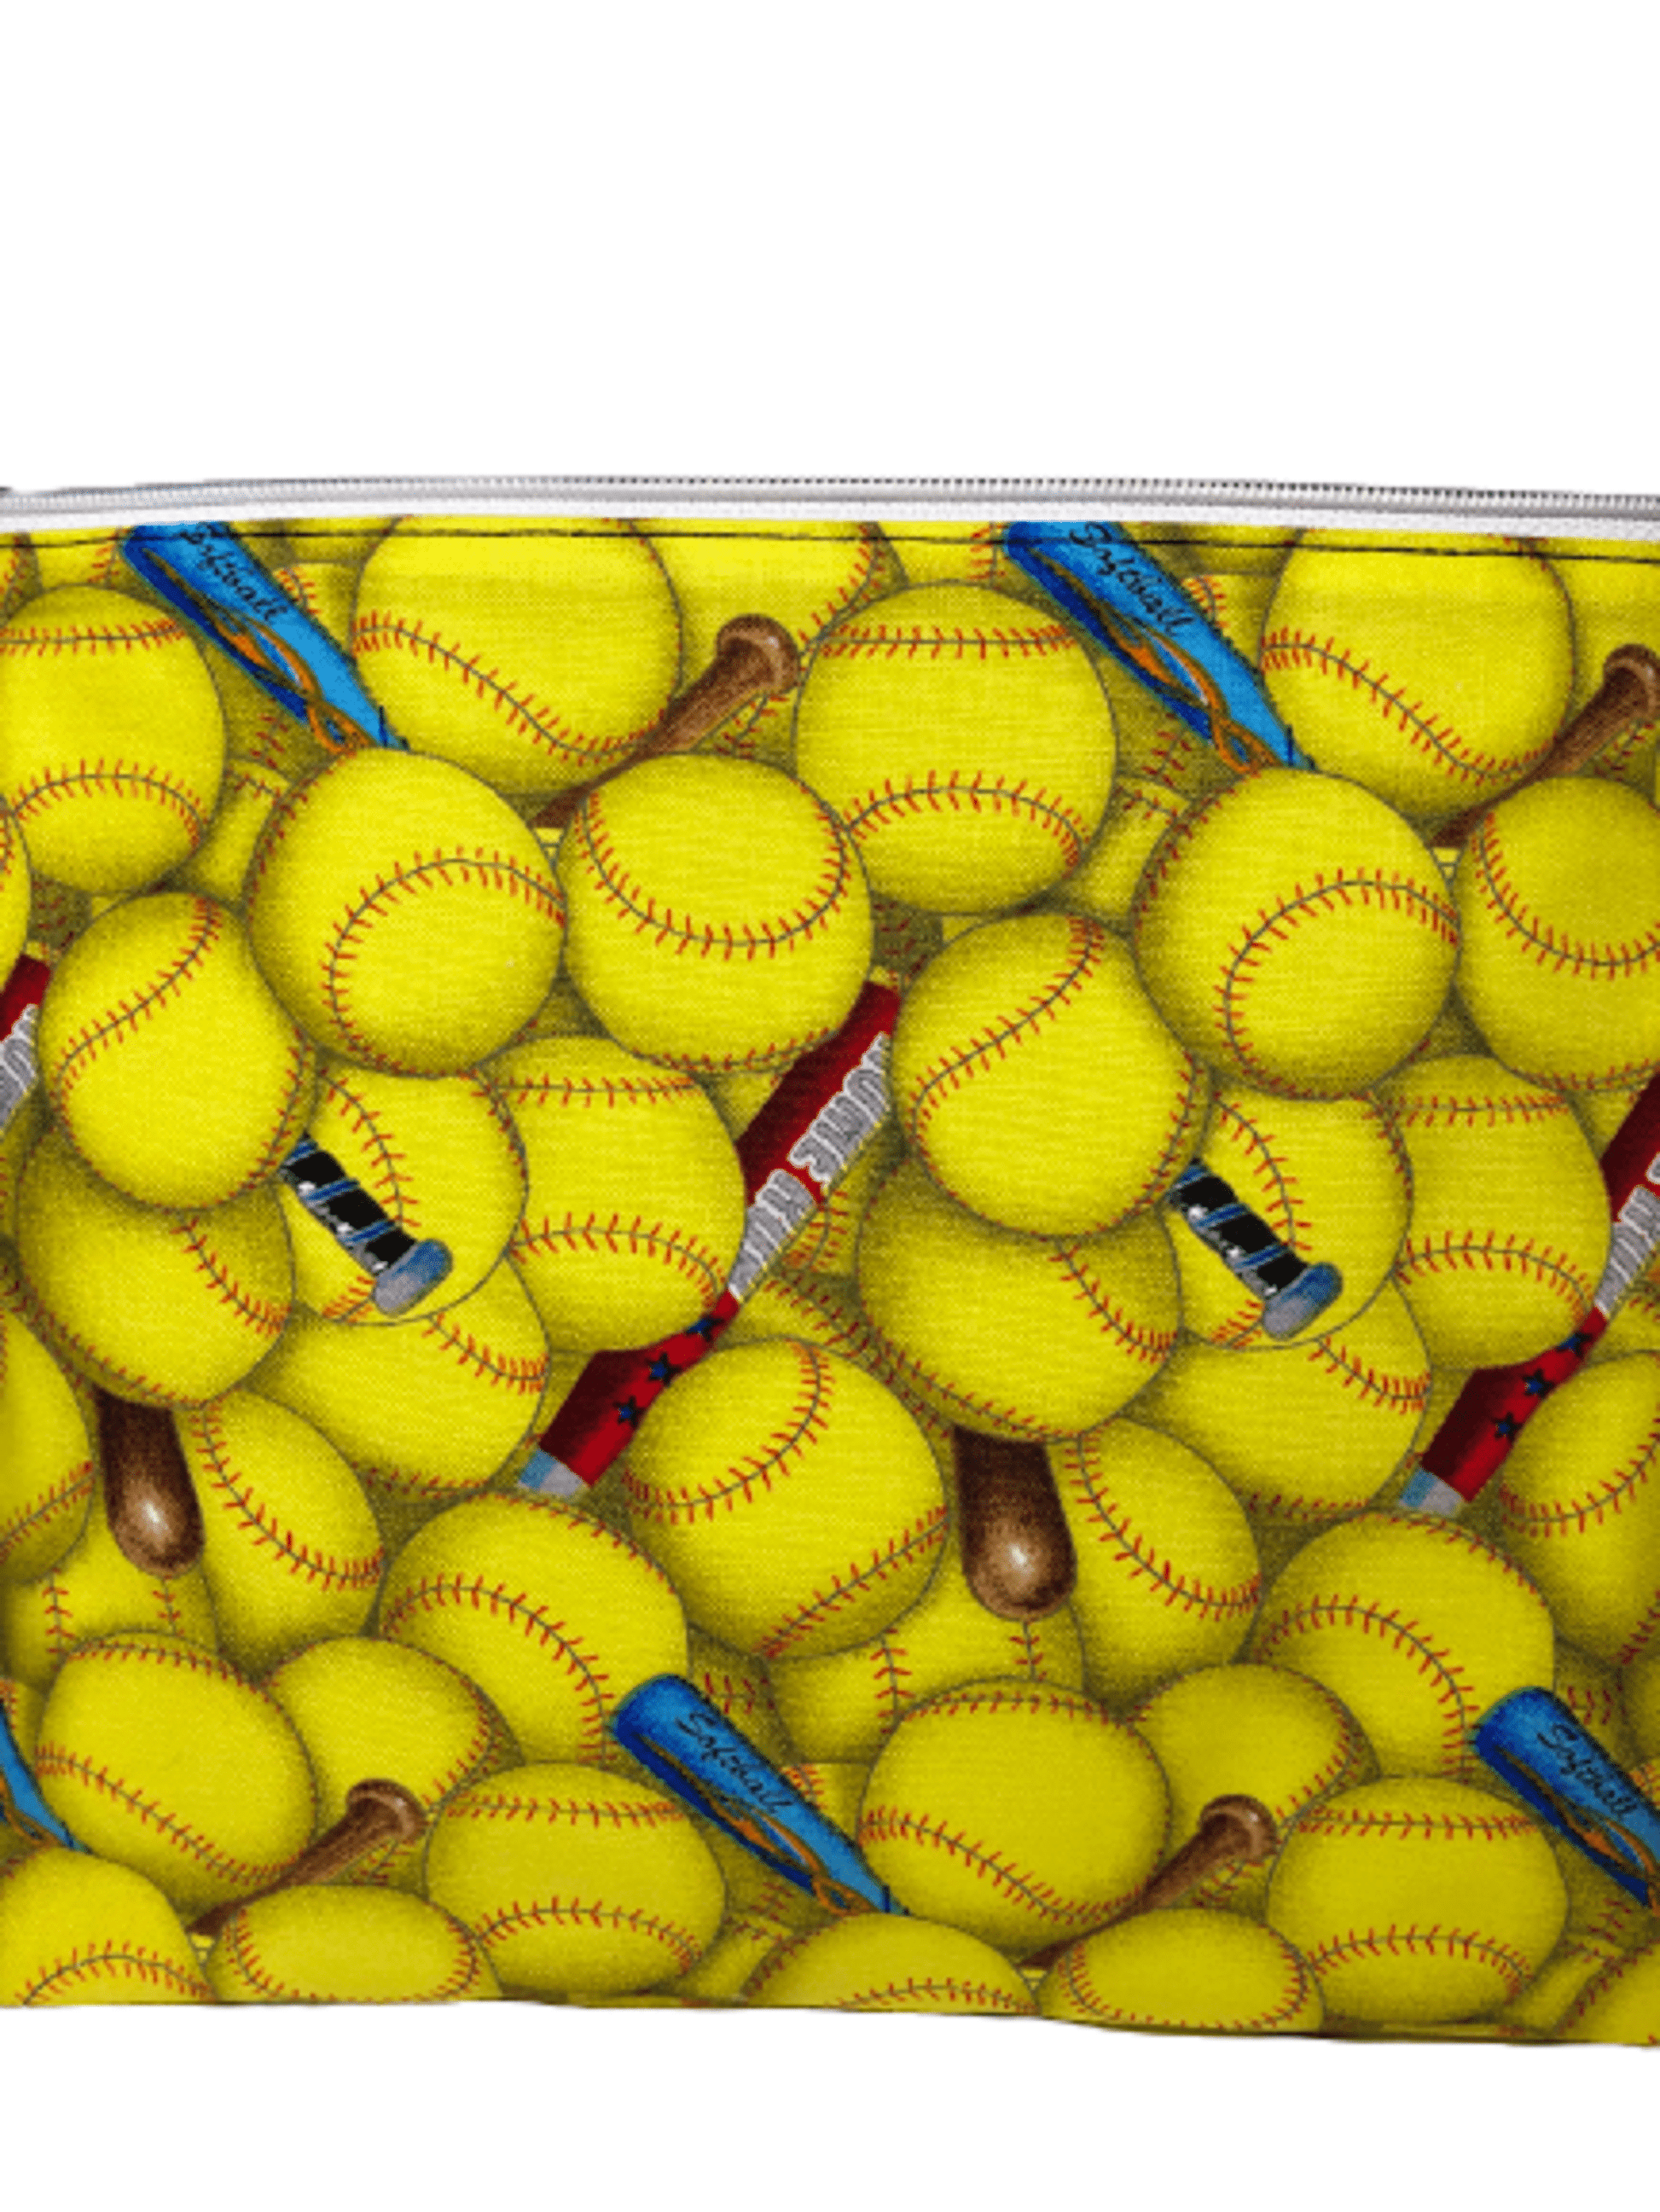 zippered bag with yellow softballs and red and blue softball bats